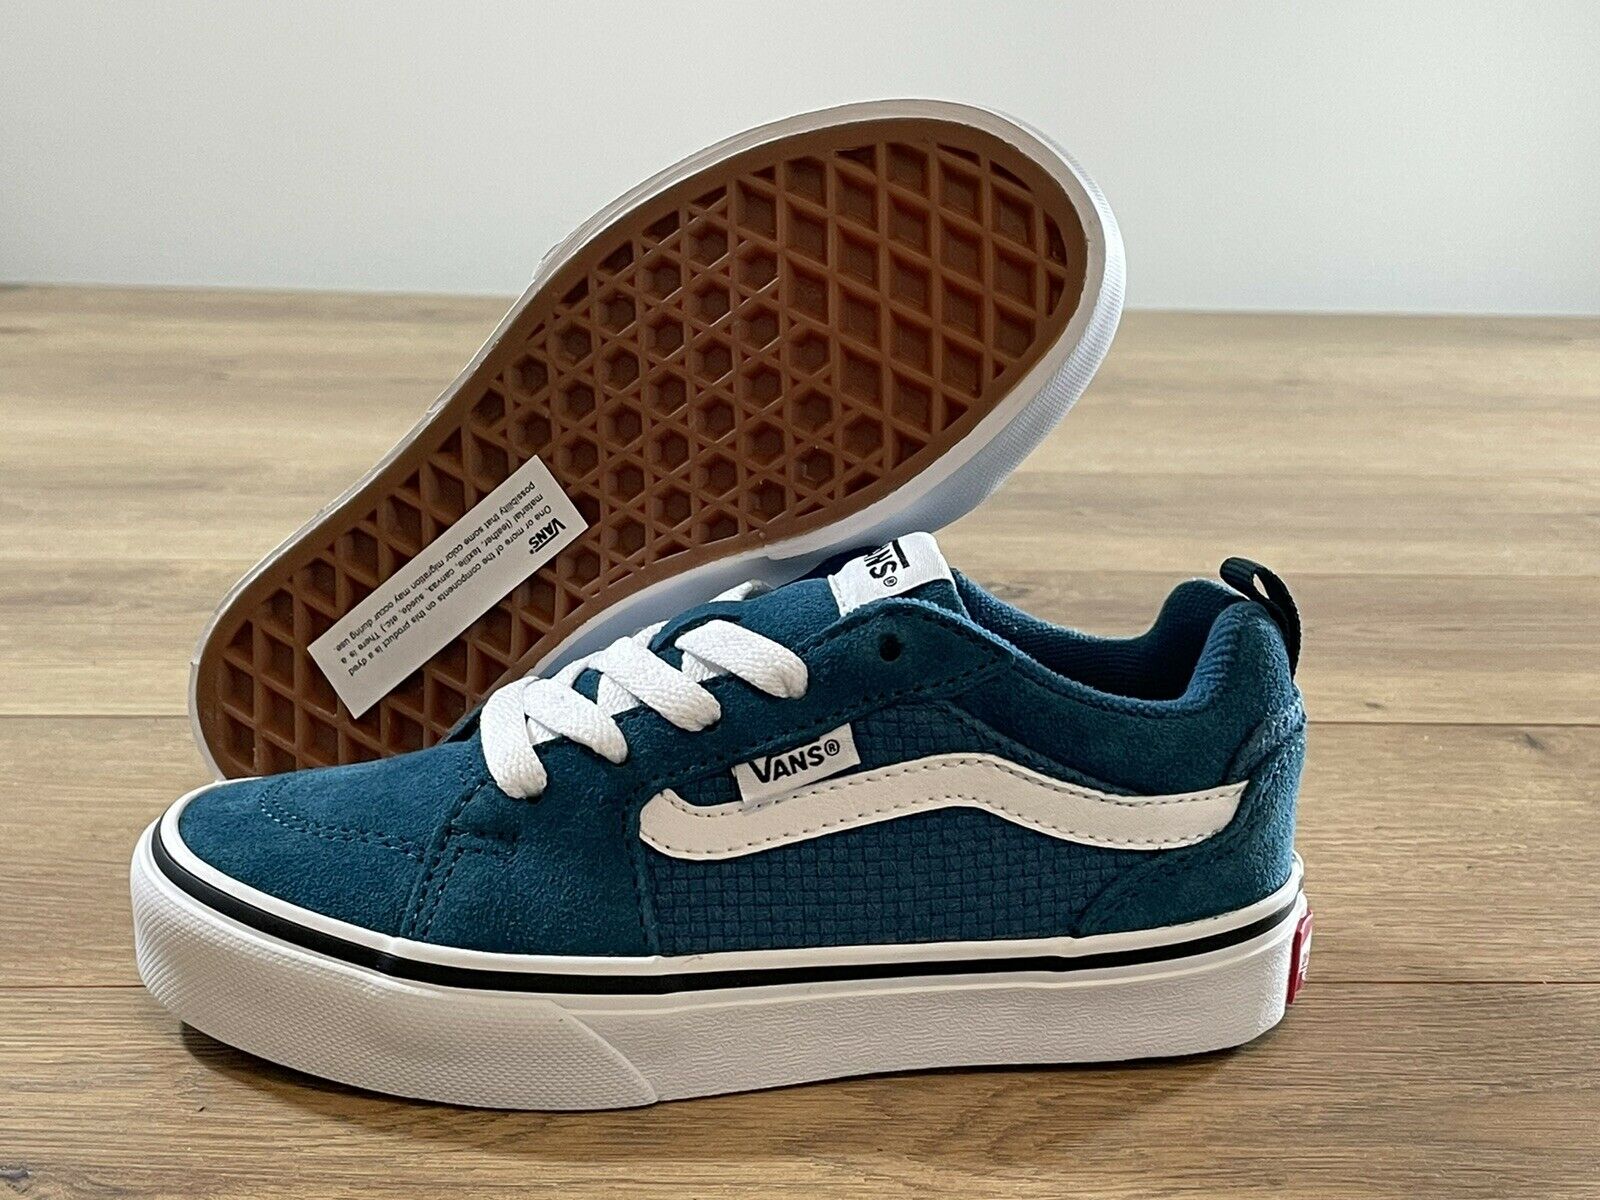 Vans YT Filmore Youth Shoes Blue Coral/White Kids SZ 13 ( VN0A3MVPA3Y )